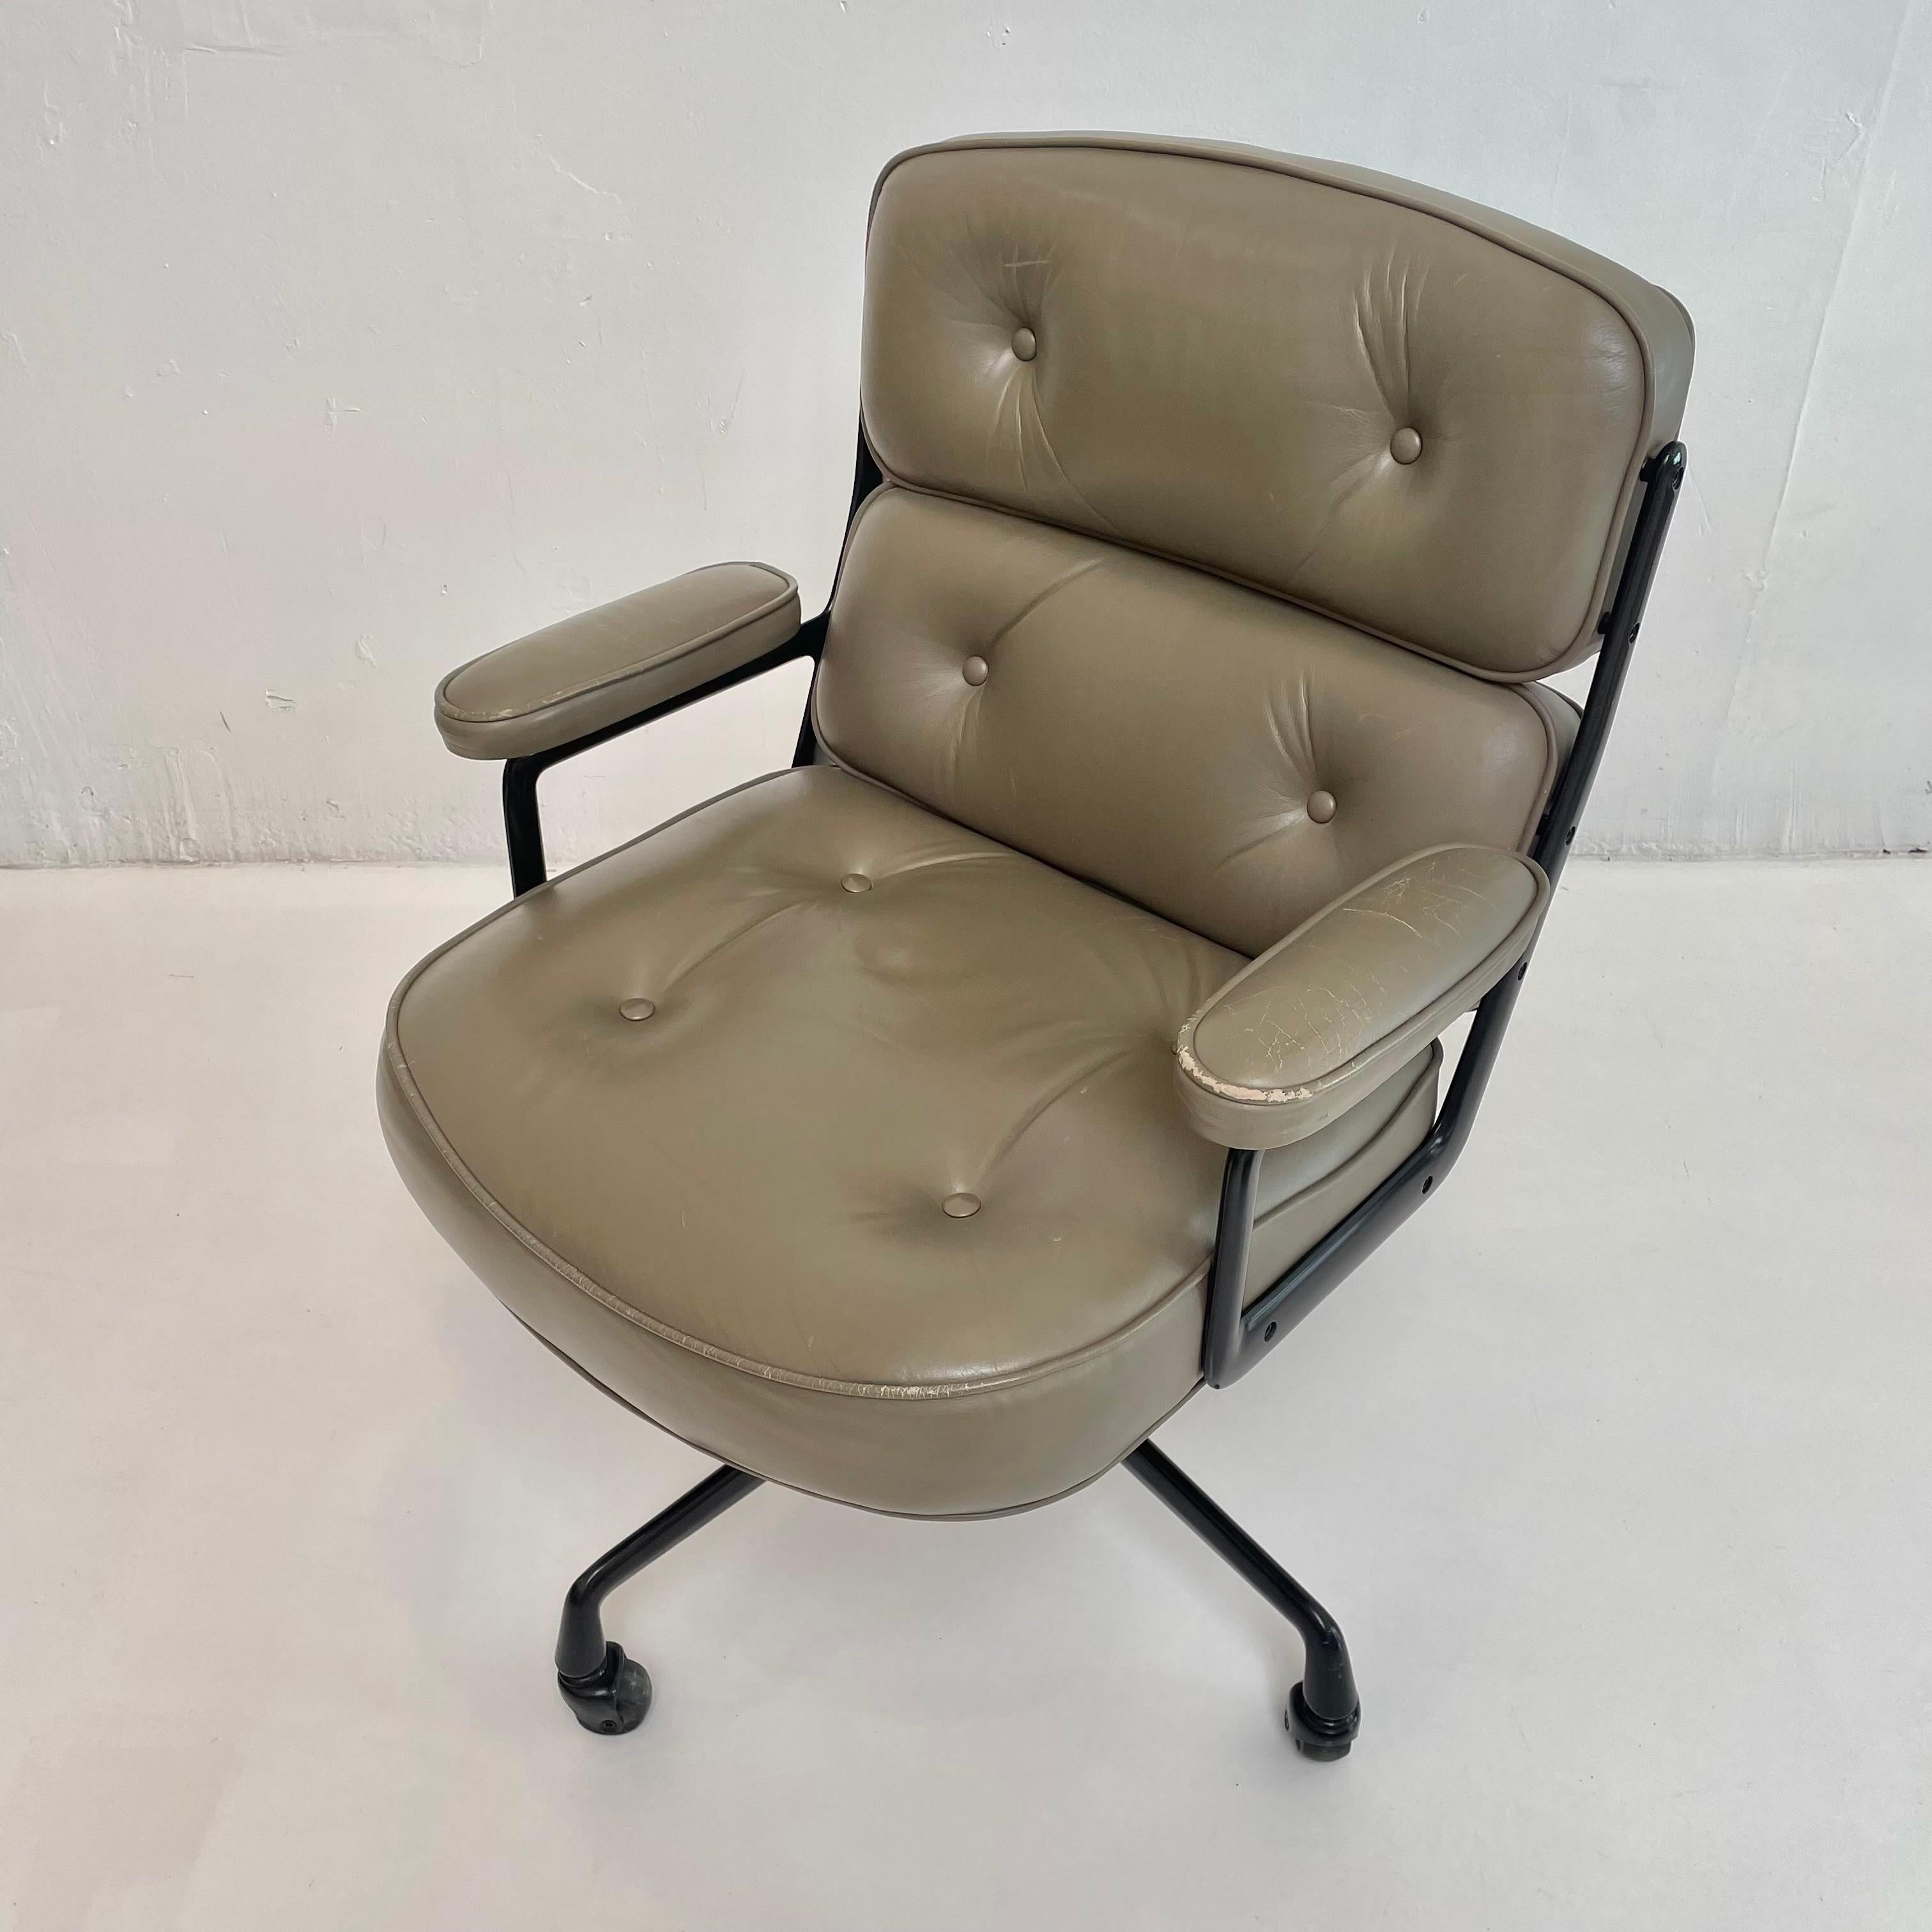 Eames Time Life Chair in Olive Leather for Herman Miller, c. 1984 USA 3